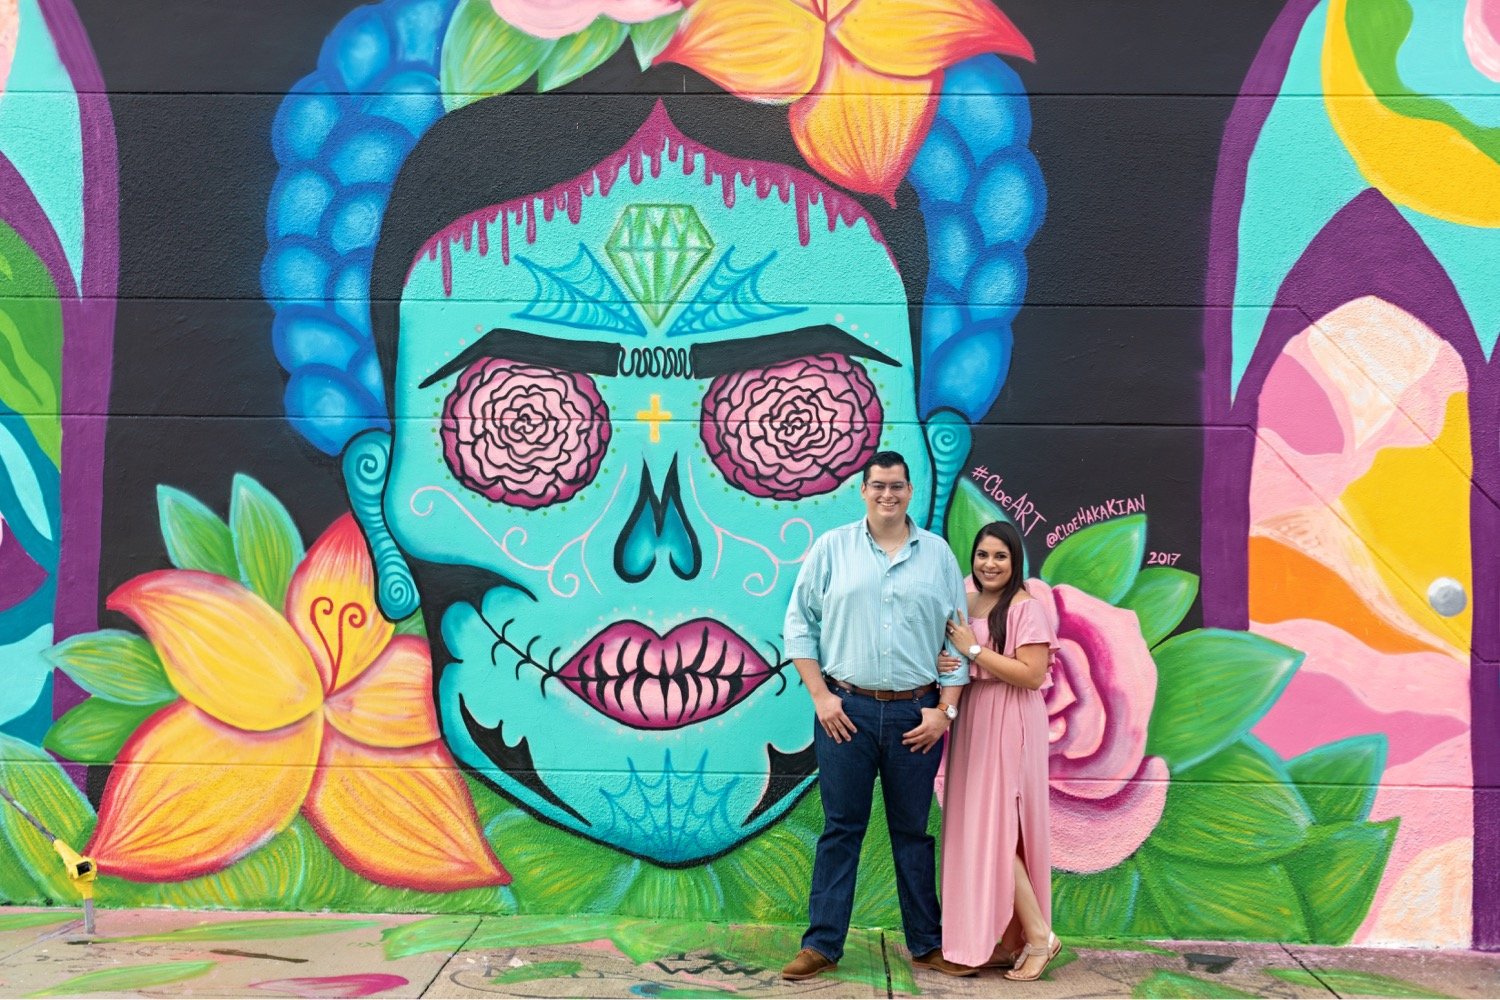 01_Wynwood-Walls-Engagement-Session-Miami-Engagement-Photographer_6411 1_posing_during_couple_in_walls_engagement_wynwood_hispanic_a_session_Mural_thier_of_front_Miami_photographer.jpg